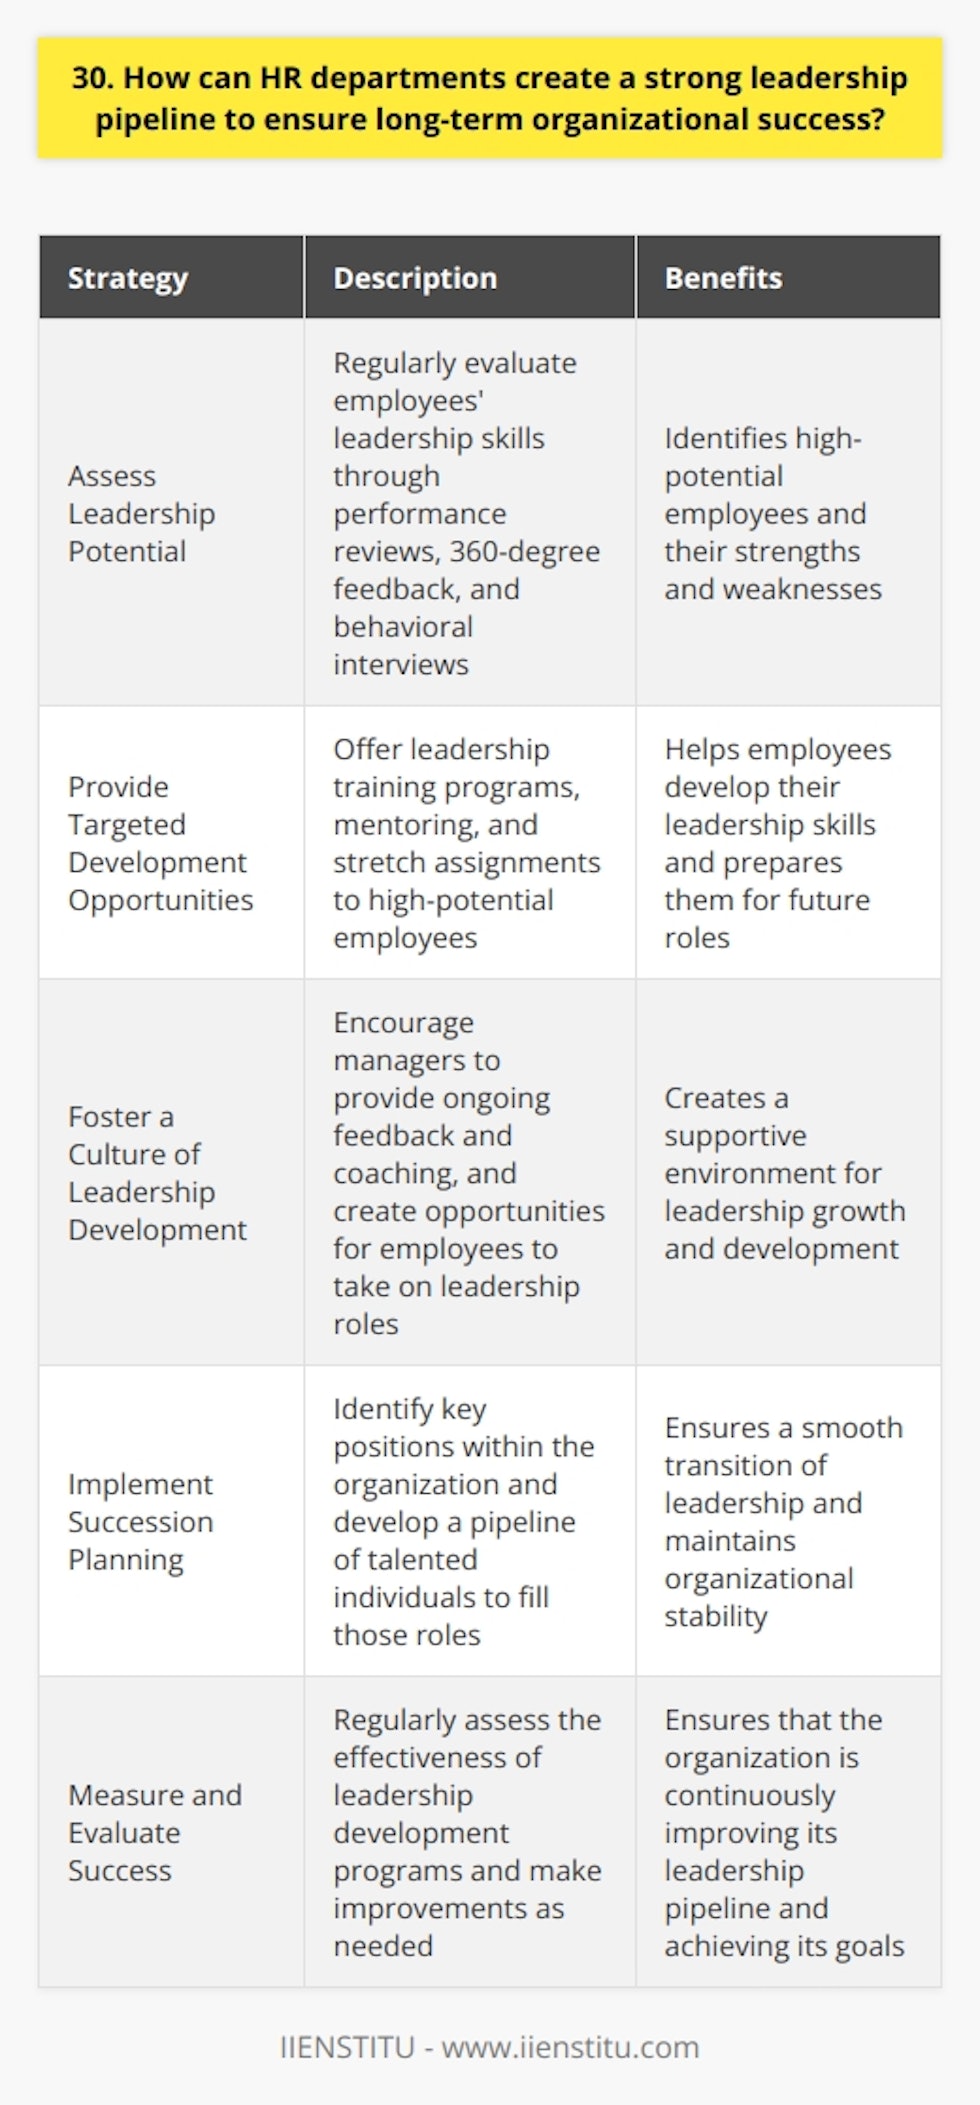 HR departments play a crucial role in creating a strong leadership pipeline for long-term organizational success. They should identify high-potential employees and provide them with targeted development opportunities. Assess Leadership Potential HR should regularly assess employees leadership potential through performance evaluations, 360-degree feedback, and behavioral interviews. They should look for individuals who demonstrate strong communication skills, emotional intelligence, and a growth mindset. Provide Targeted Development Opportunities Once high-potential employees are identified, HR should offer them targeted development opportunities. This could include leadership training programs, mentoring, and stretch assignments that challenge them to grow. I remember when I was working at my previous company, HR implemented a leadership development program. They selected a group of high-potential employees, including myself, to participate in a six-month program. We attended workshops on topics like effective communication, delegation, and strategic thinking. We also had the opportunity to work on cross-functional projects and receive mentoring from senior leaders. Foster a Culture of Leadership Development HR should foster a culture of leadership development throughout the organization. They should encourage managers to provide ongoing feedback and coaching to their direct reports. Additionally, HR can create opportunities for employees to take on leadership roles, such as leading a project team or mentoring a new hire. By providing these opportunities, HR can help employees develop their leadership skills in a safe and supportive environment. Succession Planning Finally, HR should have a robust succession planning process in place. They should identify key positions within the organization and develop a pipeline of talented individuals who can step into those roles when needed. By taking a proactive approach to leadership development, HR can ensure that the organization has a strong pipeline of leaders who are ready to take on new challenges and drive the business forward.